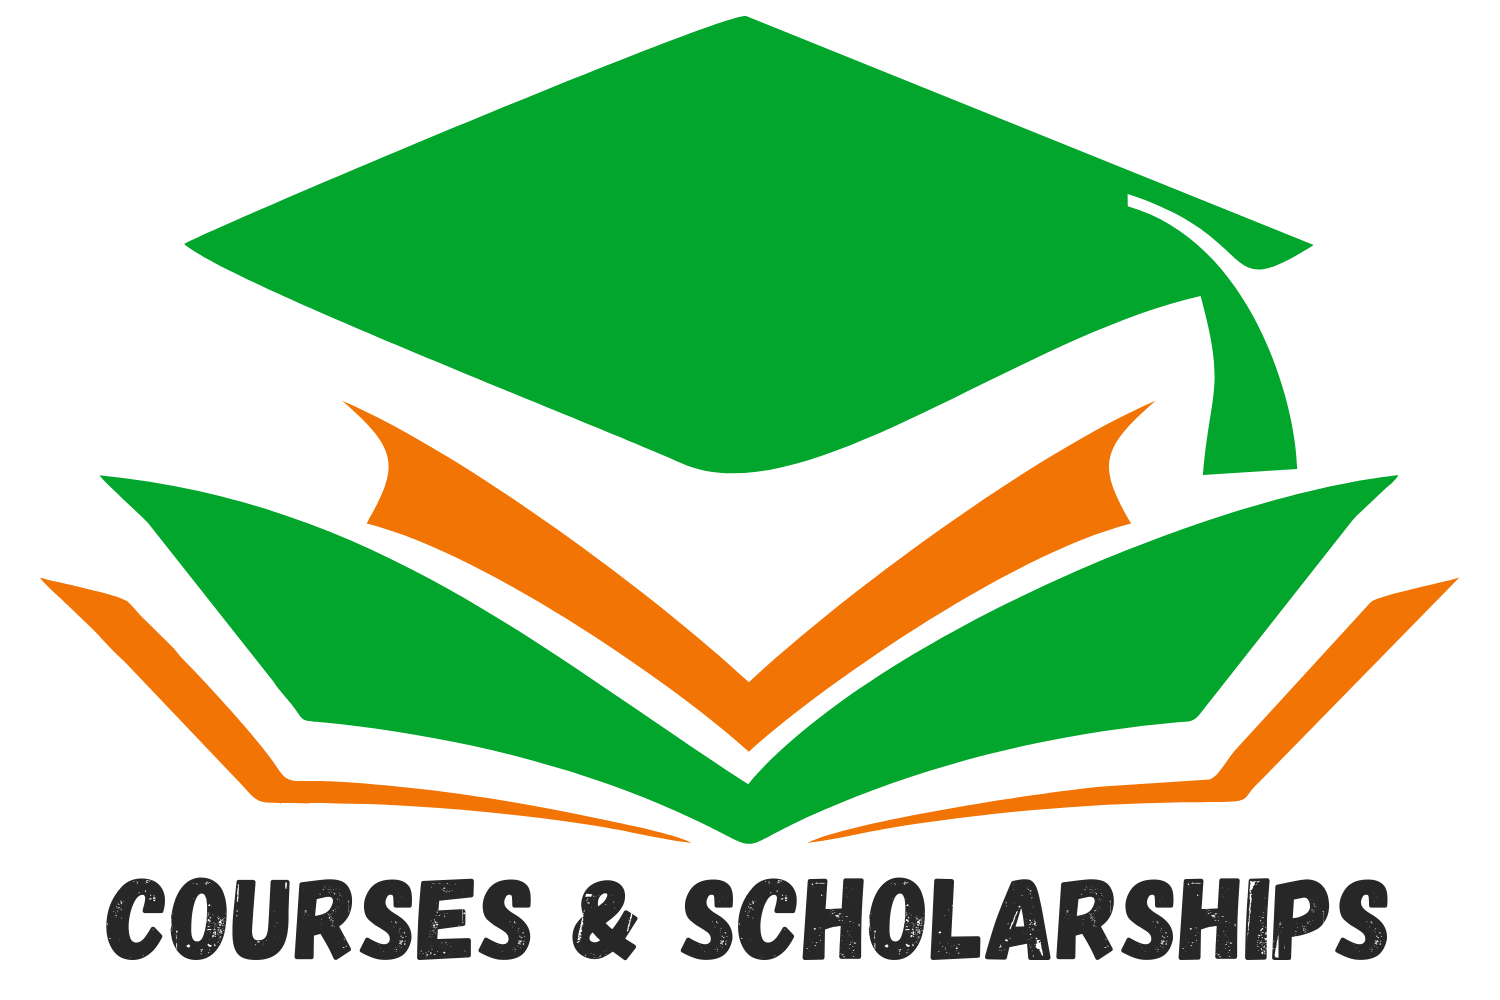 Courses & Scholarships